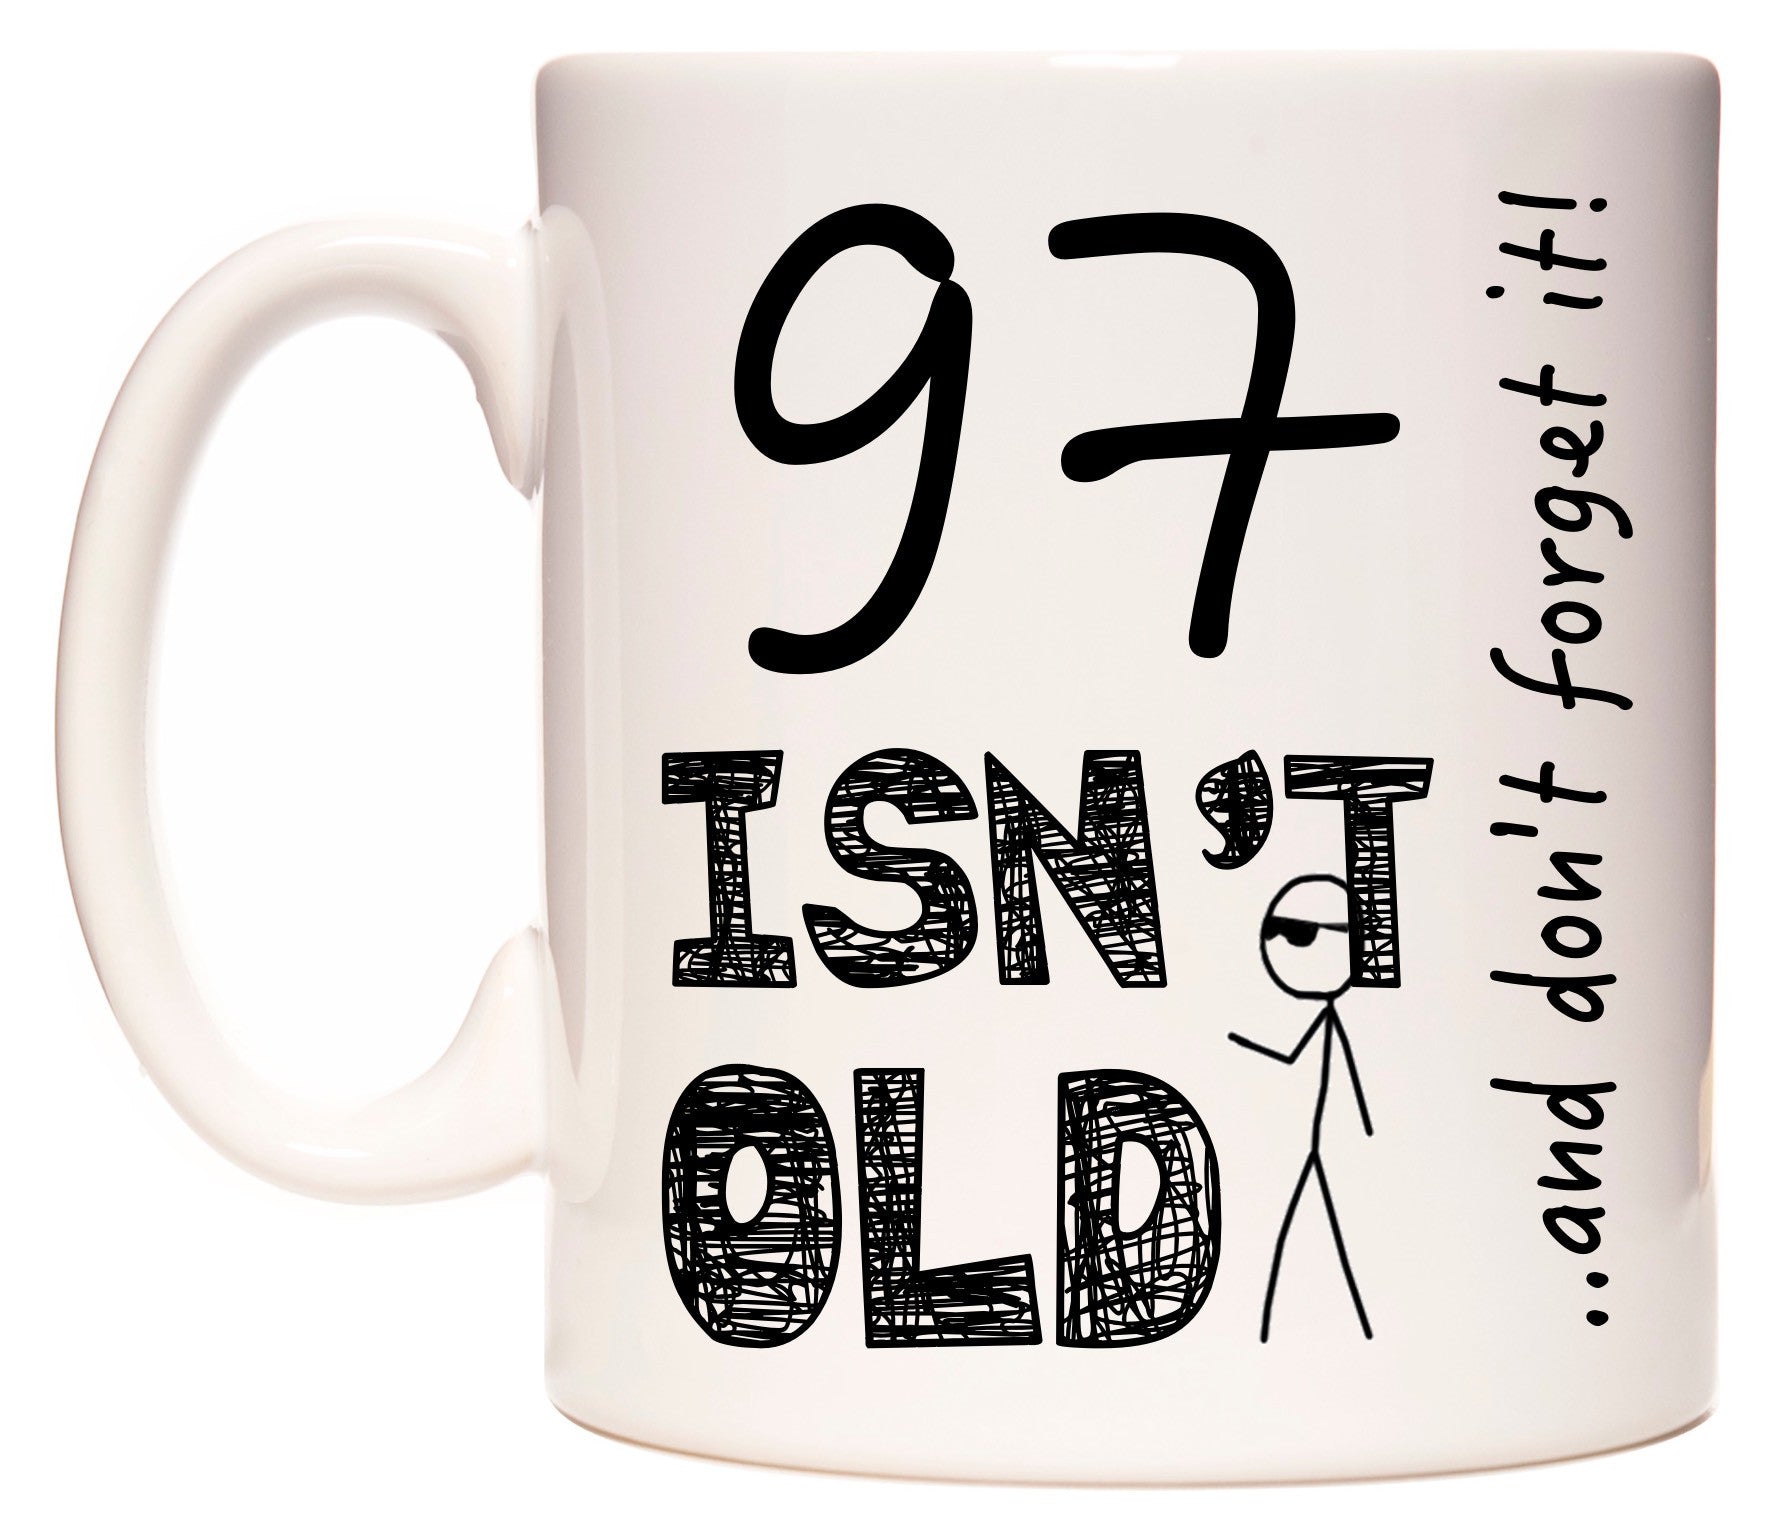 This mug features 97 Isn't Old